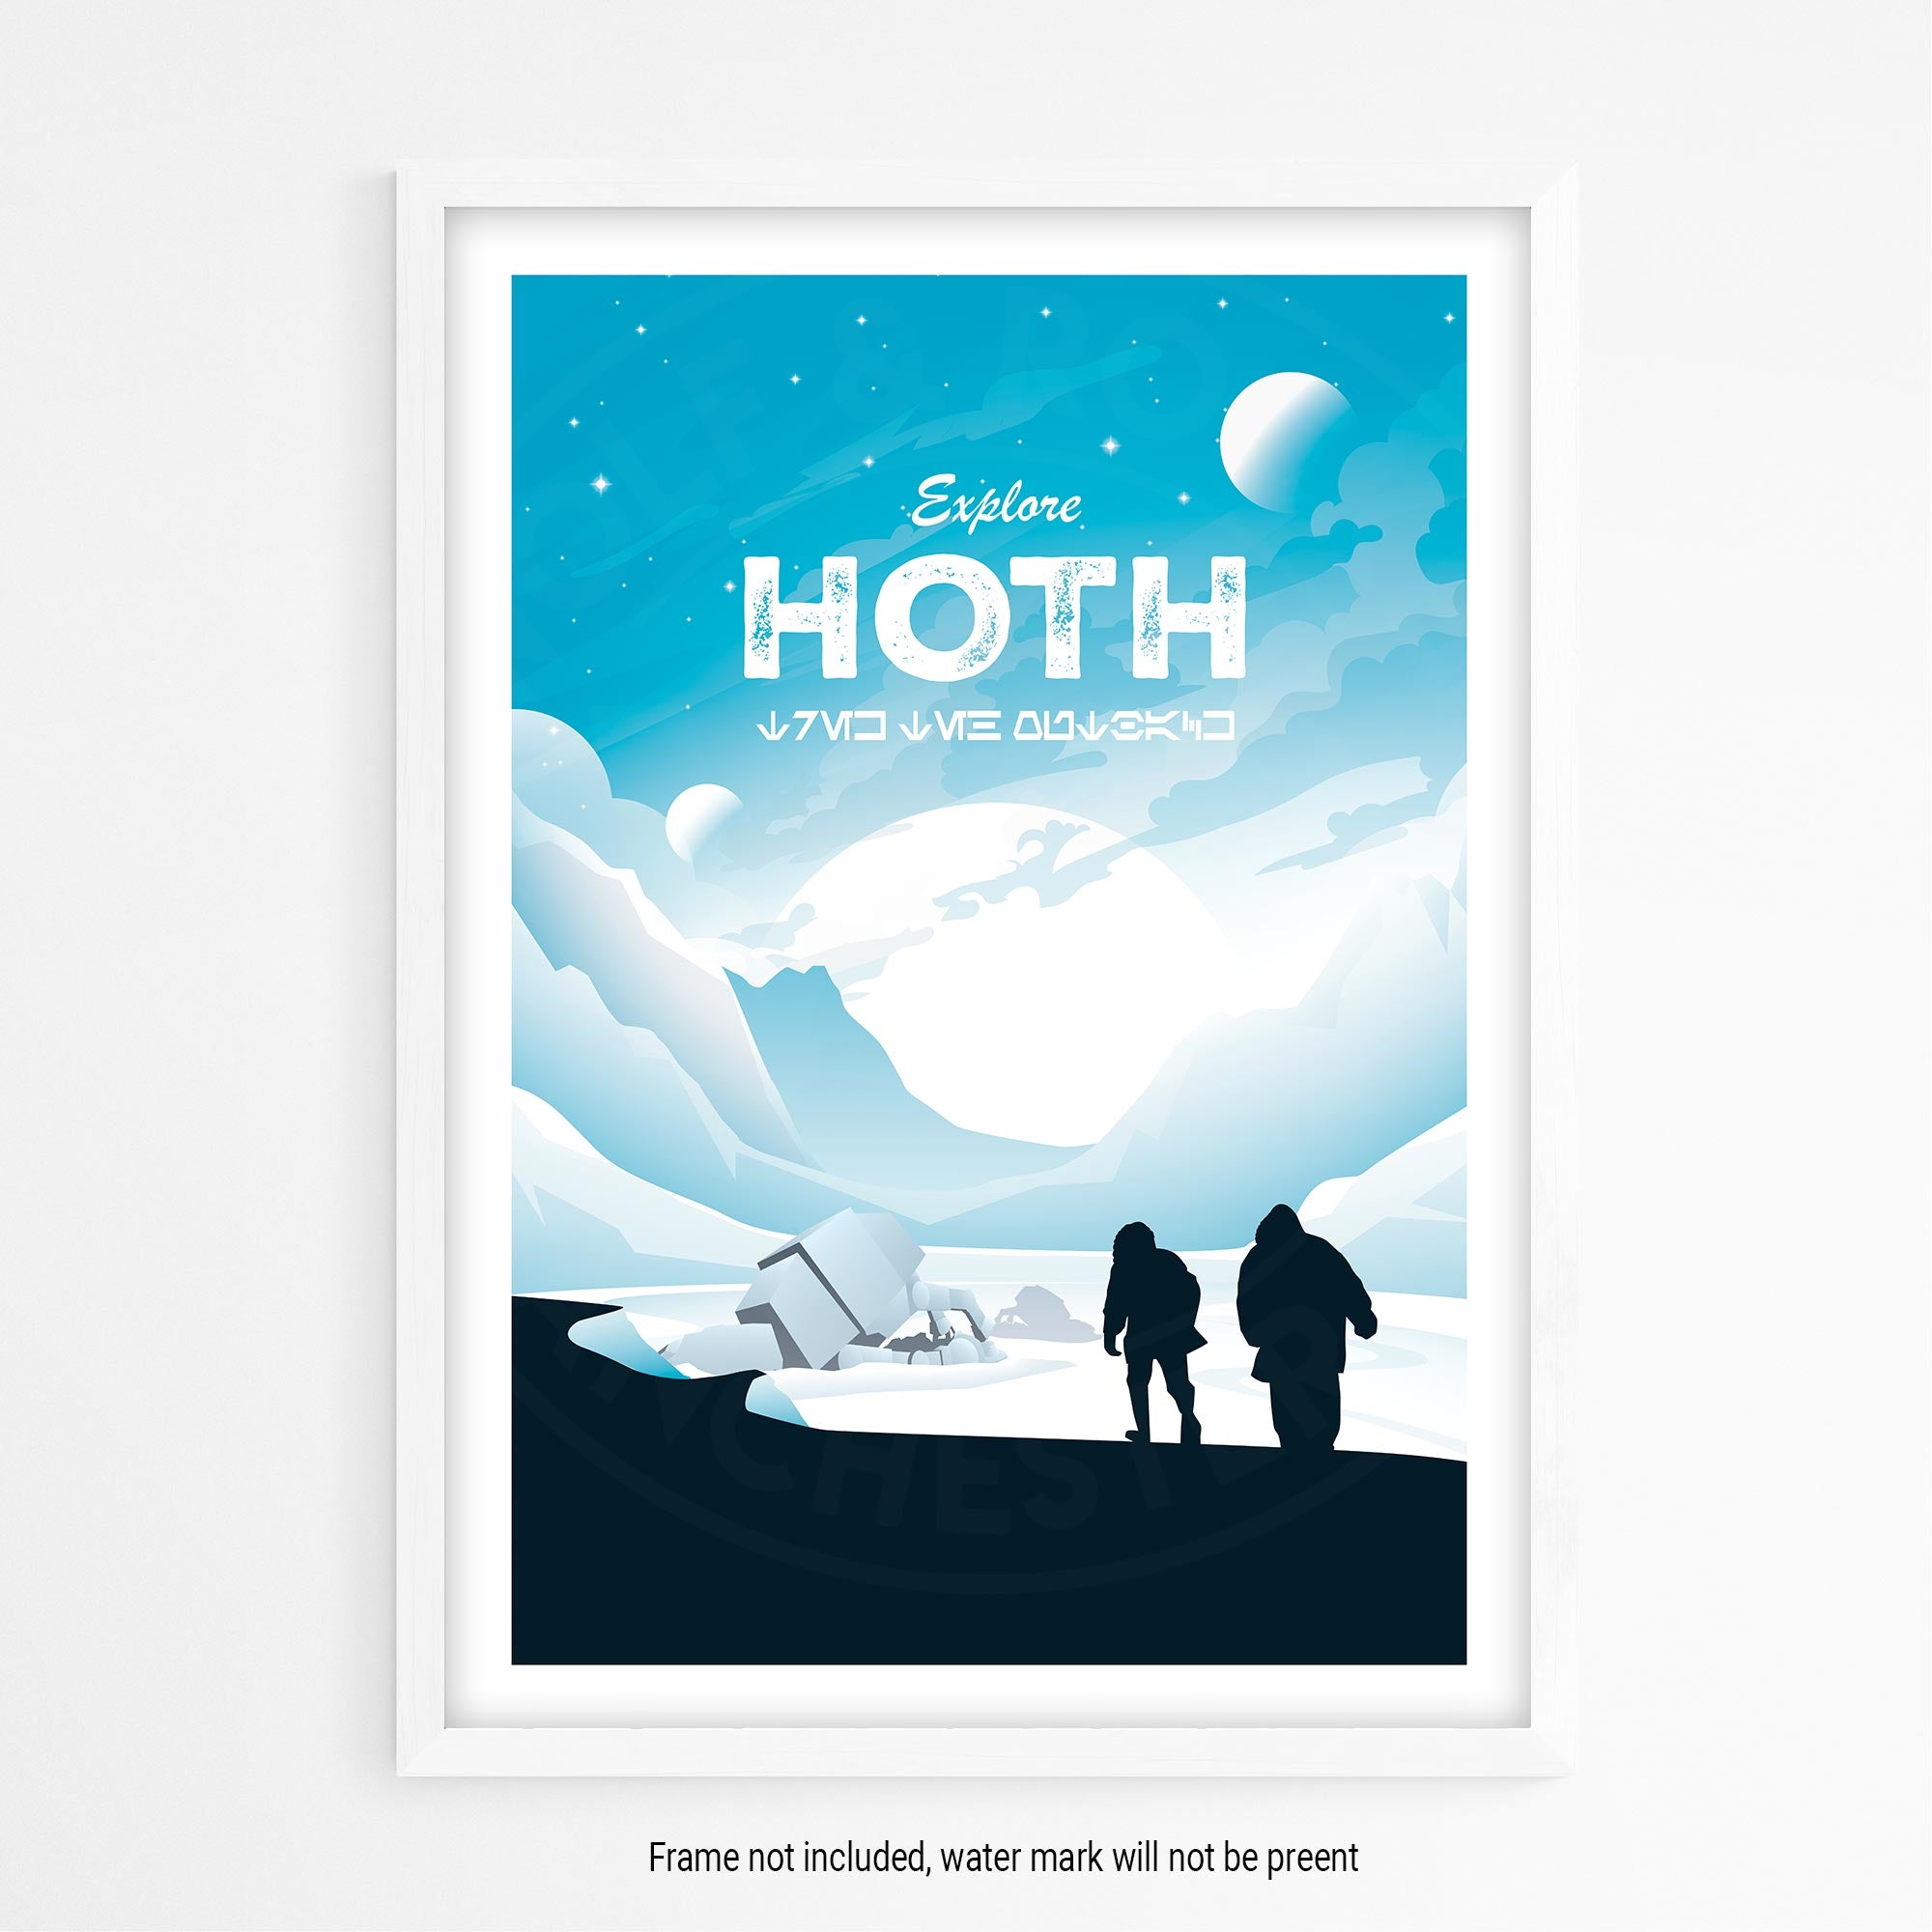 Hoth Travel Movie Poster - Wolf and Rocket